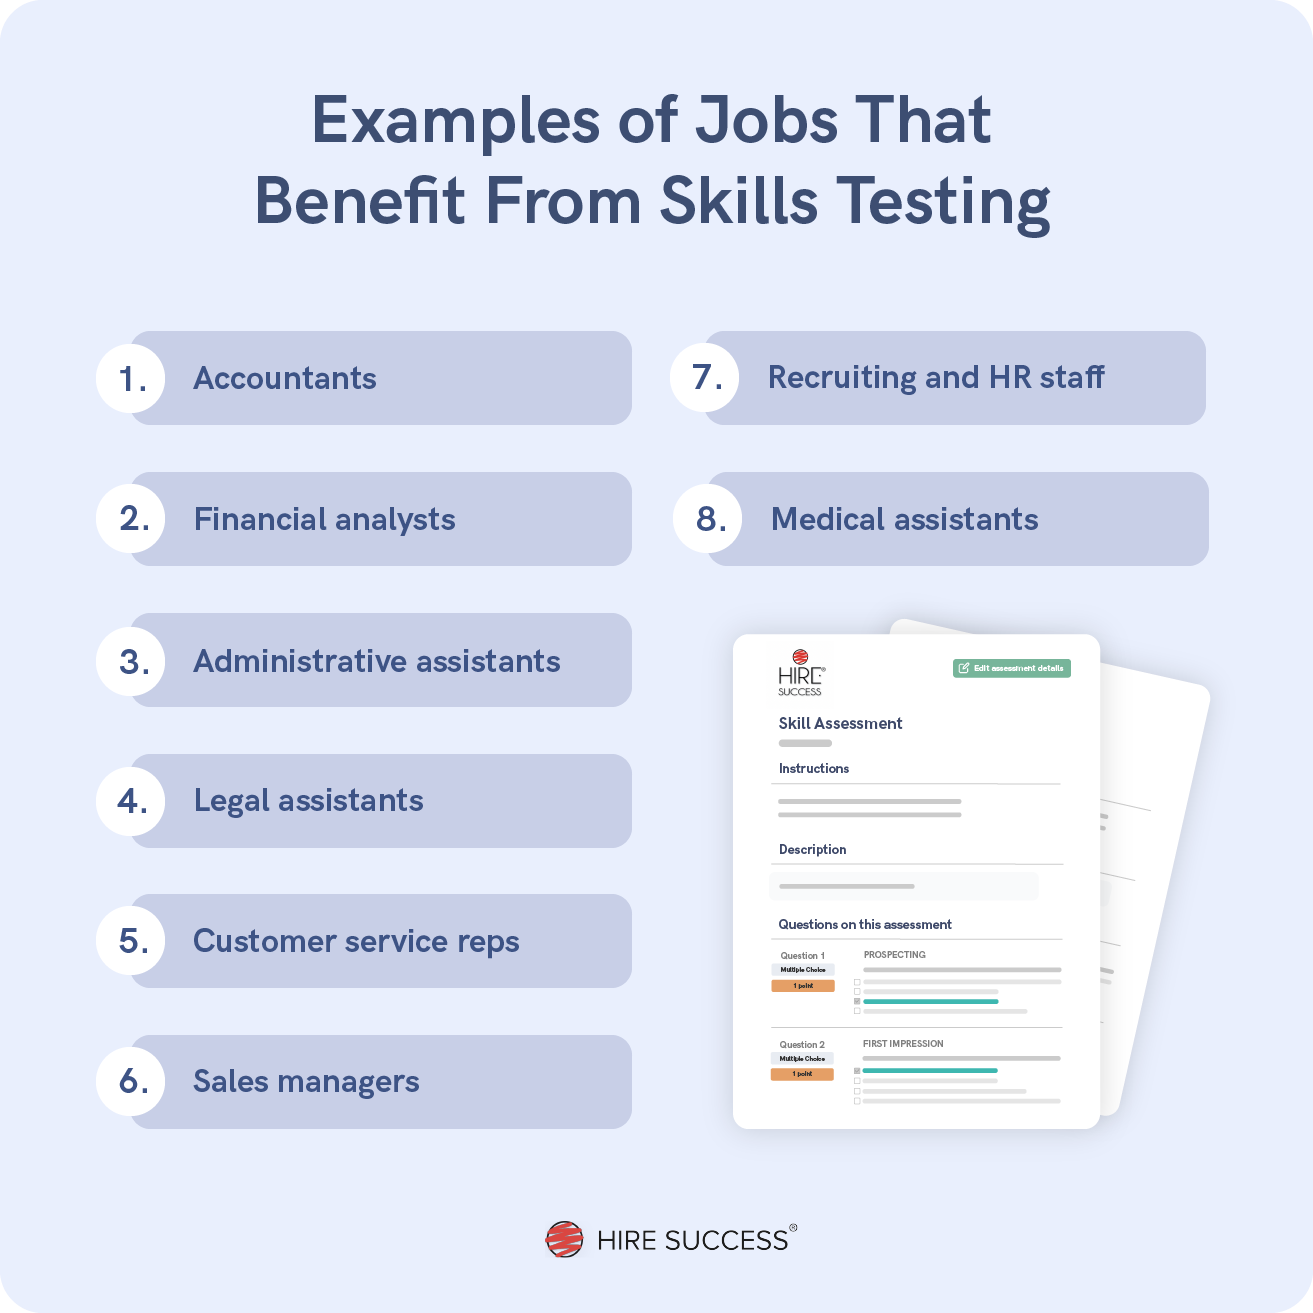 Job roles that benefit from skills testing.